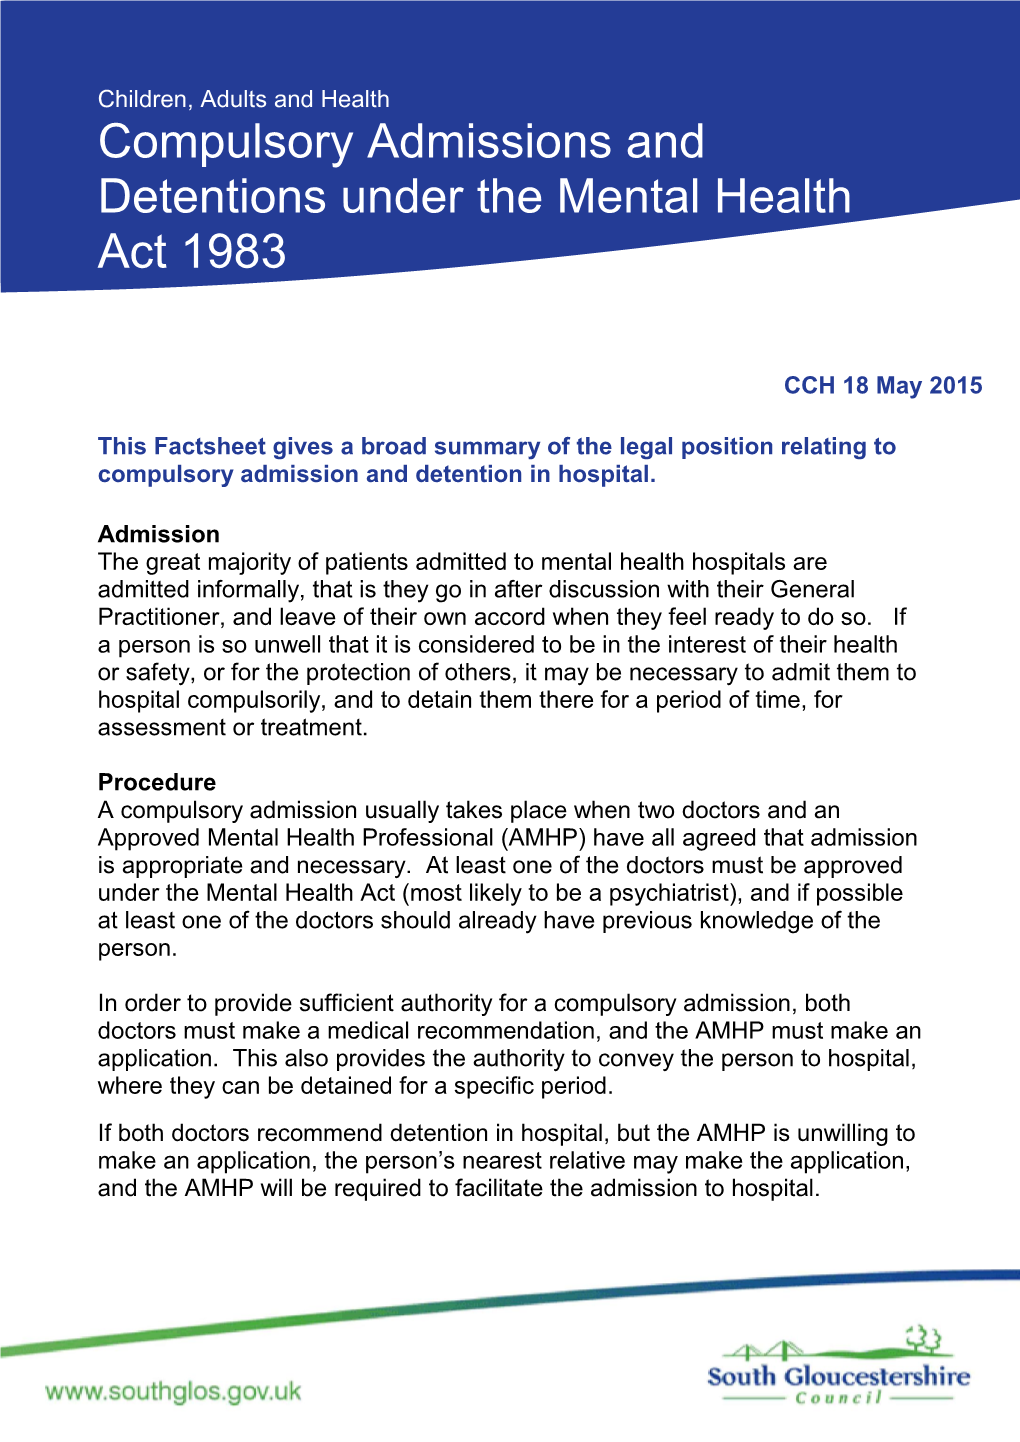 Compulsory Admissions and Detentions Under the Mental Health Act 1983